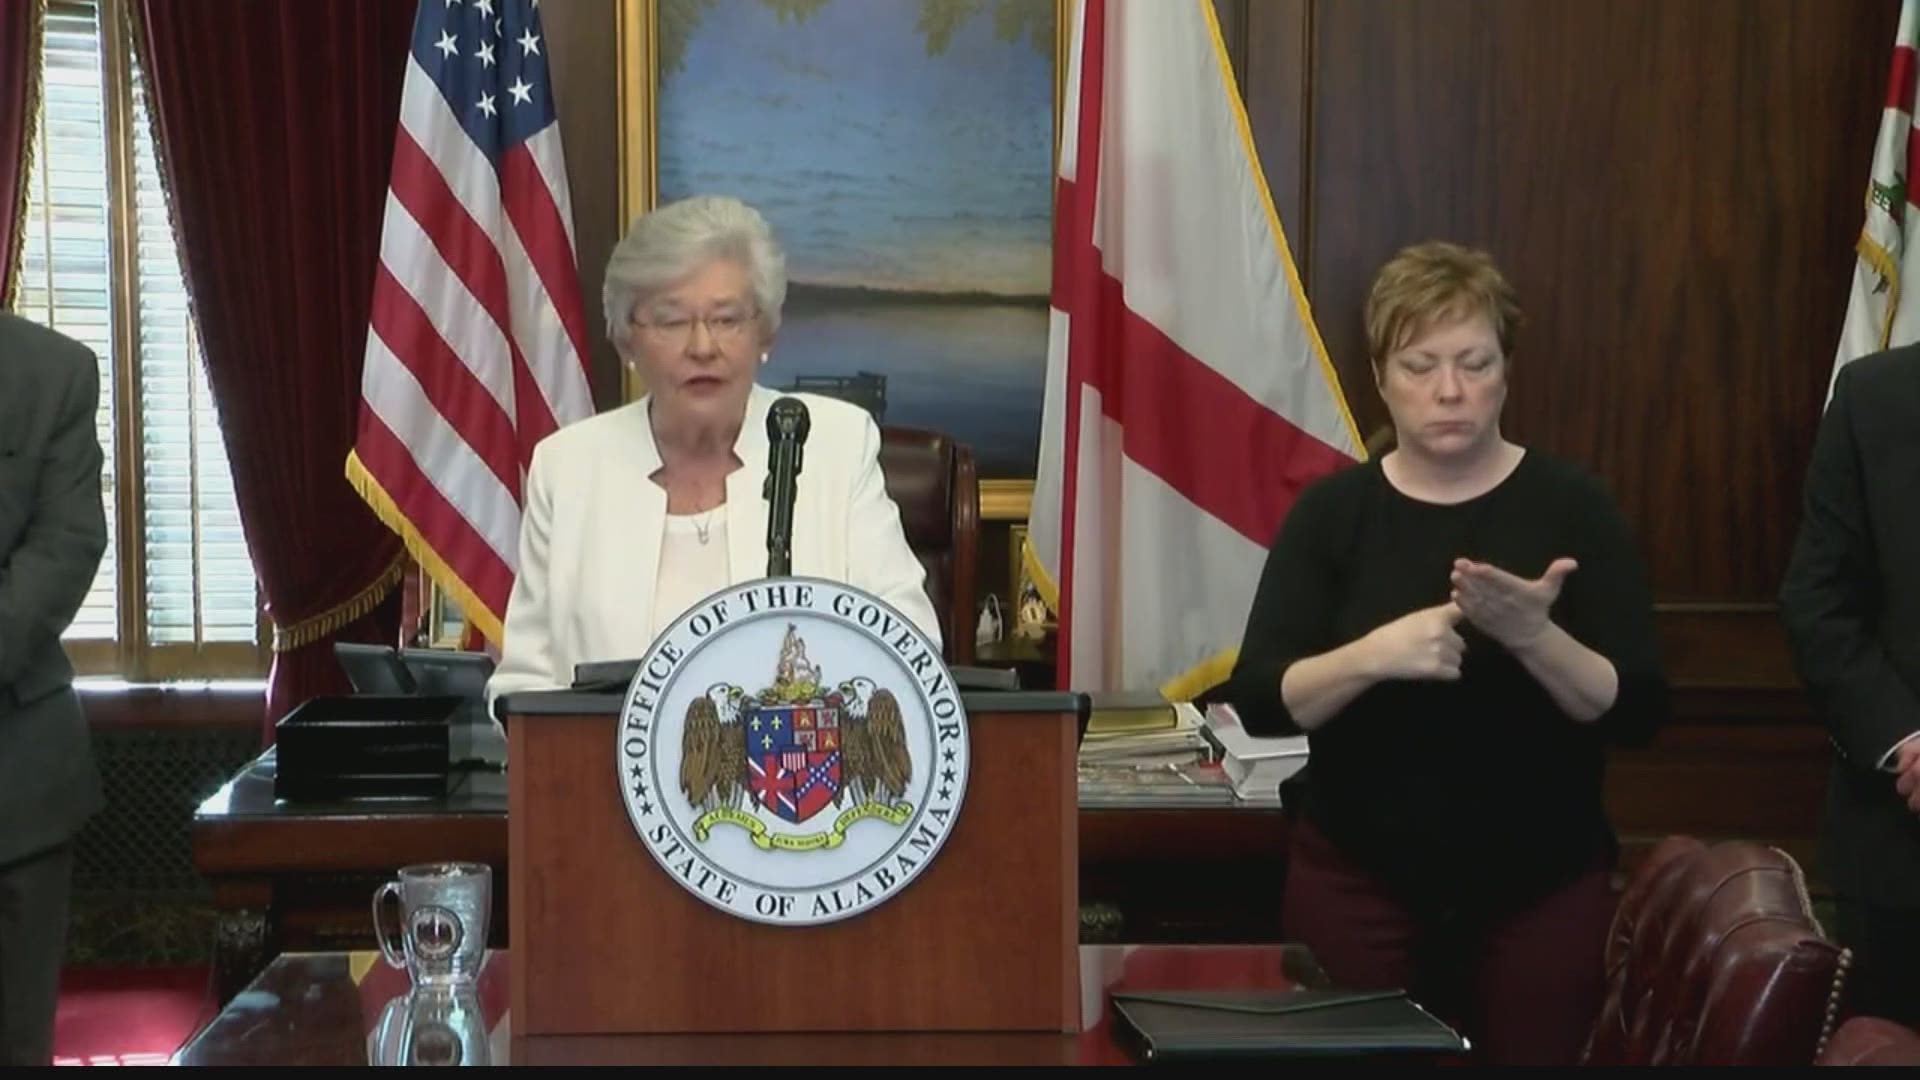 Governor Kay Ivey announced that Alabama schools will remain closed for the rest of the school year.